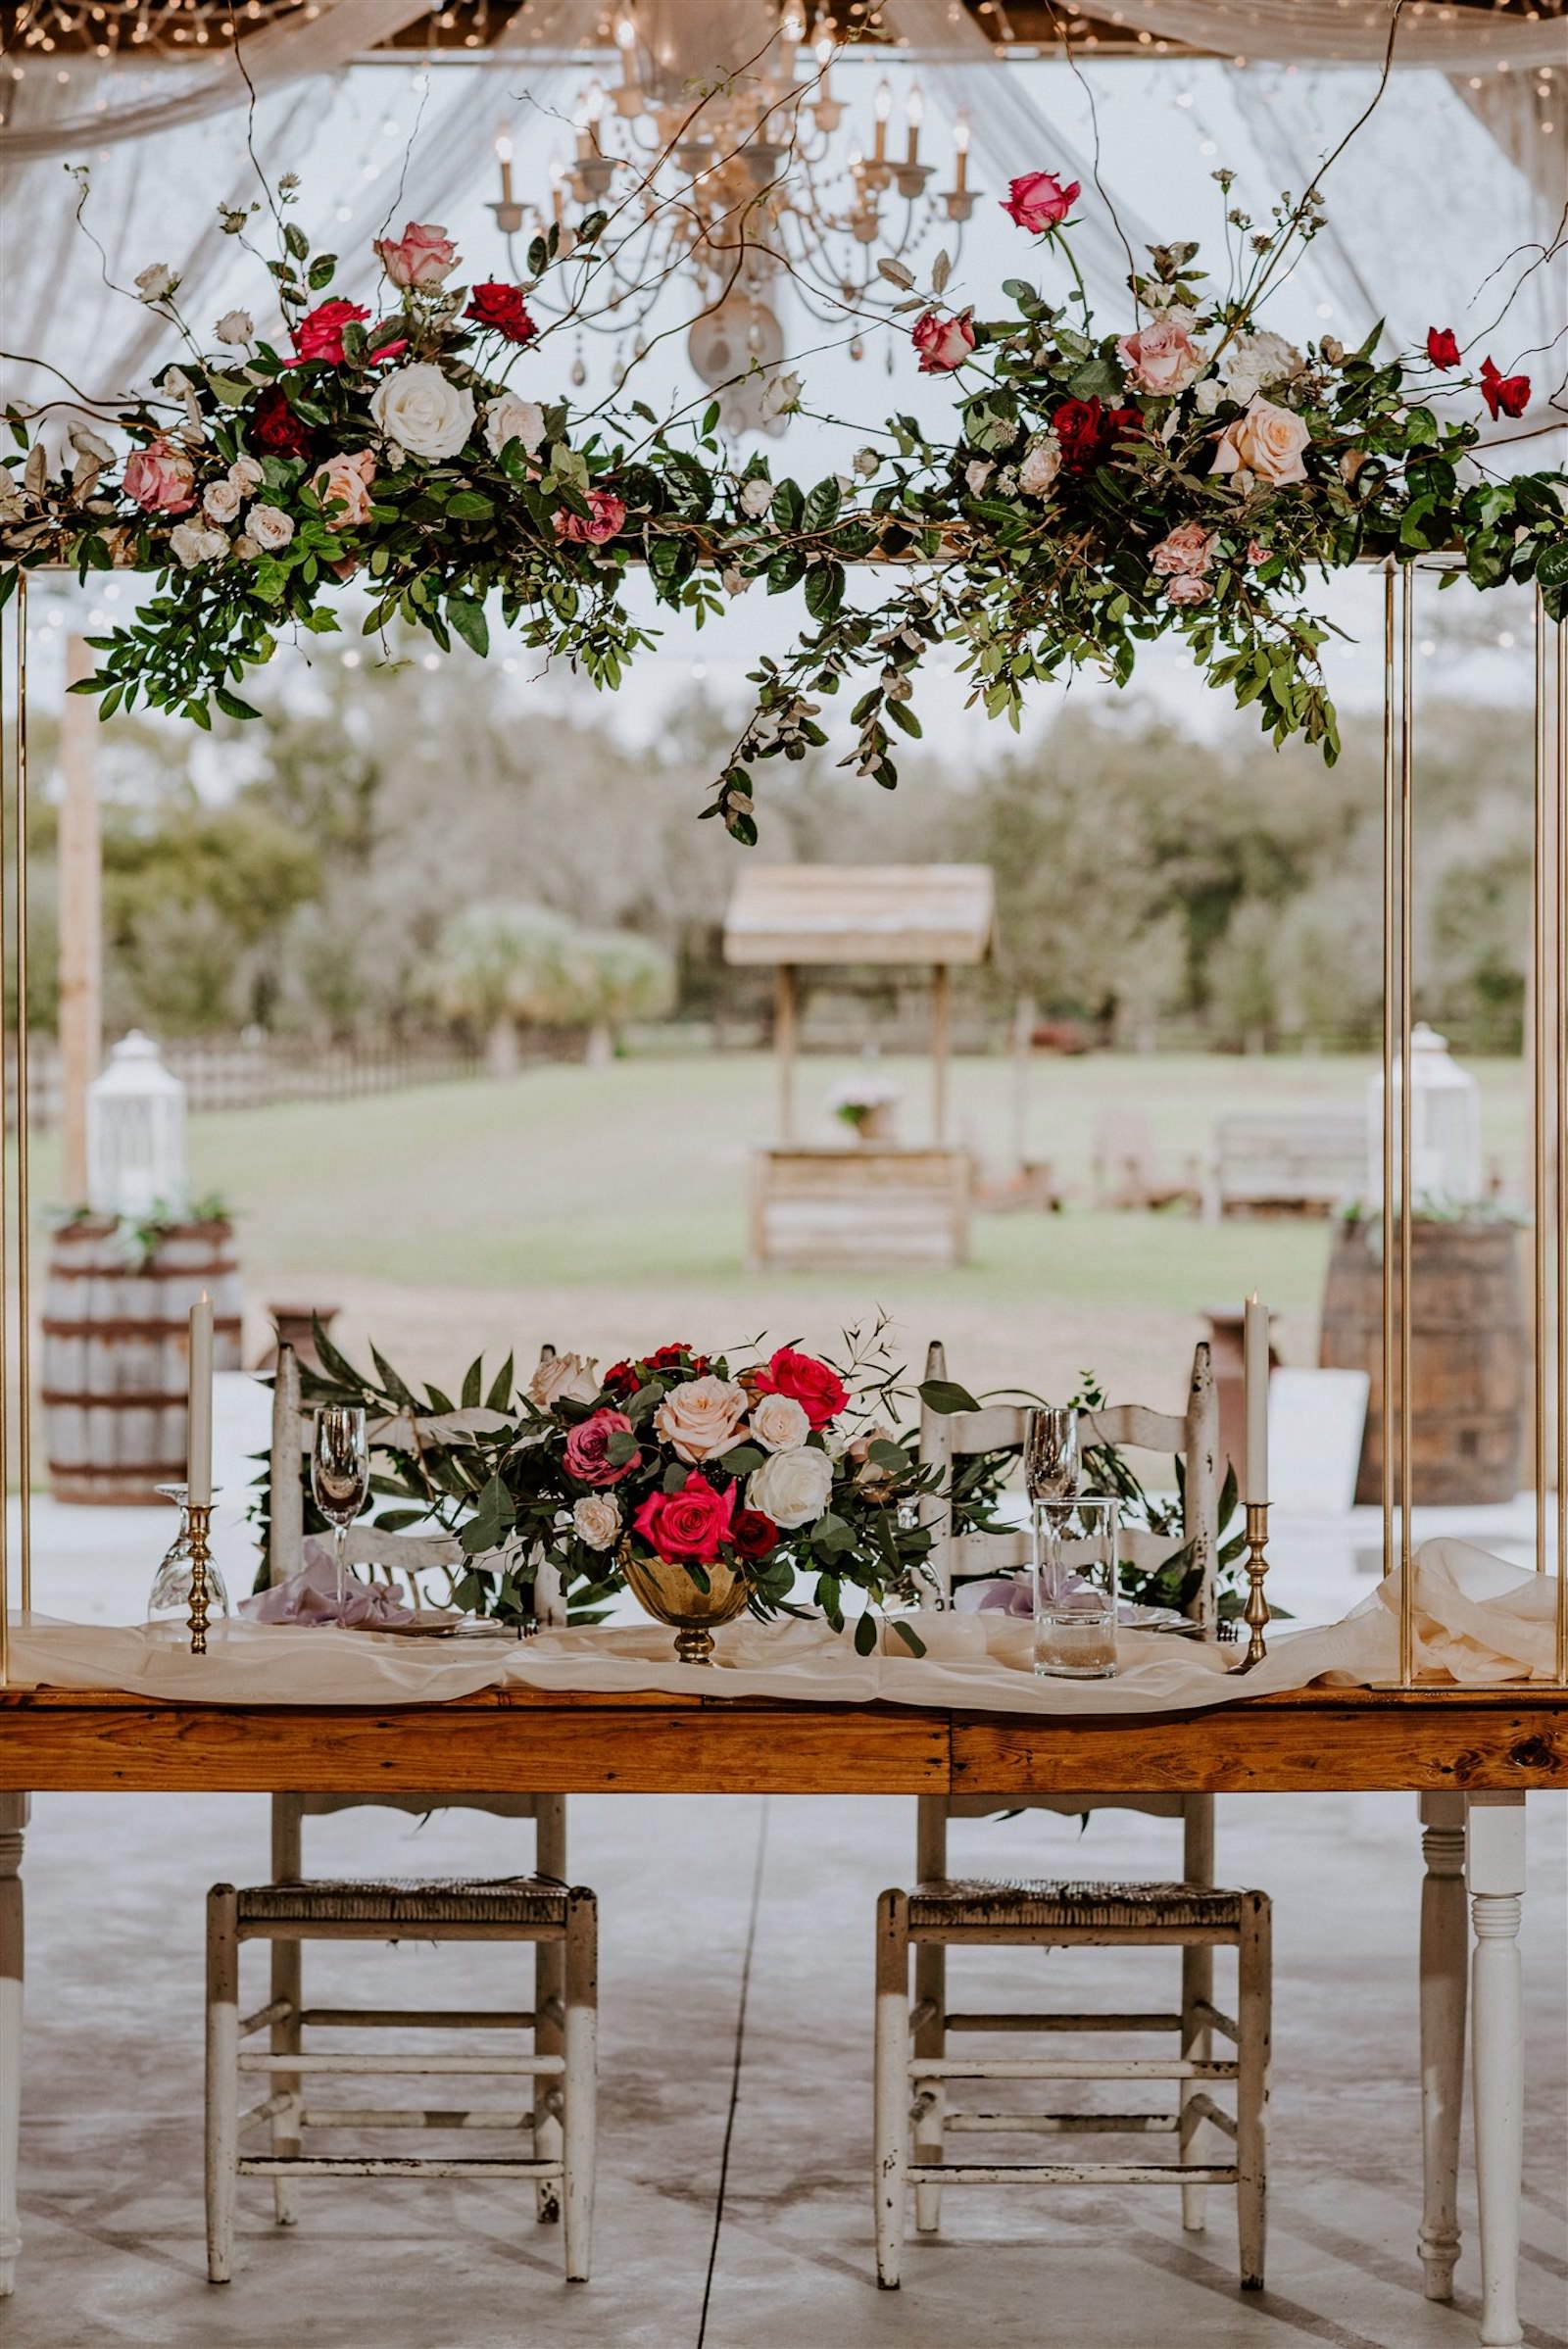 Rustic Barn Tampa Wedding with Suspended Ceiling Floral Arrangements with Blush Pink and Deep Red Burgundy Roses and Greenery | Wood Farm Sweetheart Table with Champagne Linen Runners and Taper Candlestick Candles | Tampa Wedding Florist Monarch Events and Designs